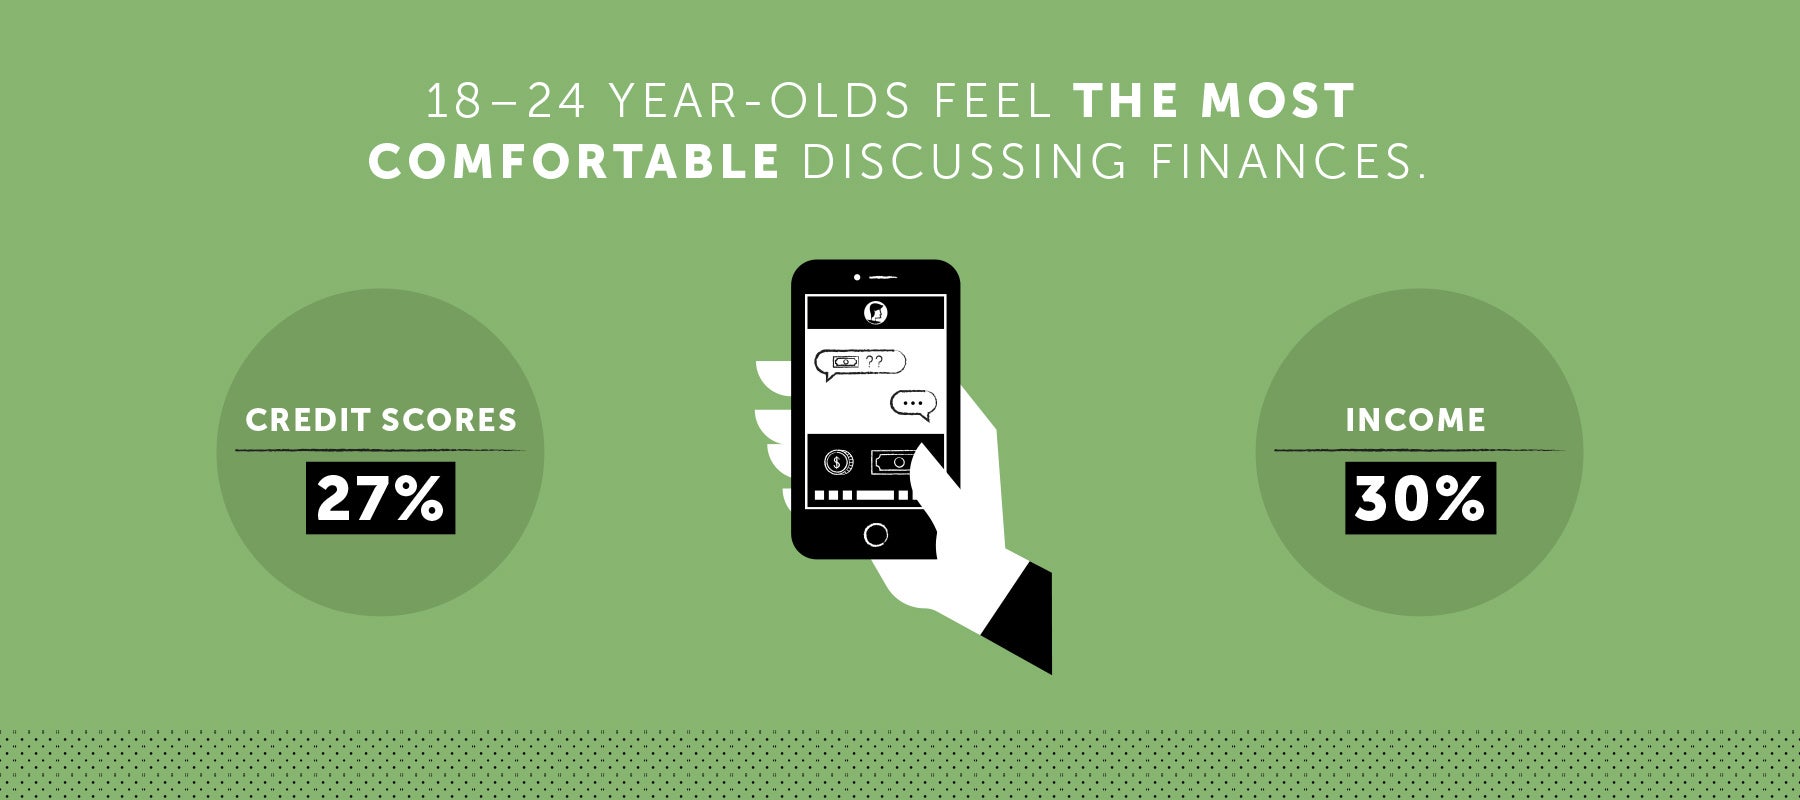 Infographic that illustrates how 18-24 old's feel the most comfortable discussing finances 